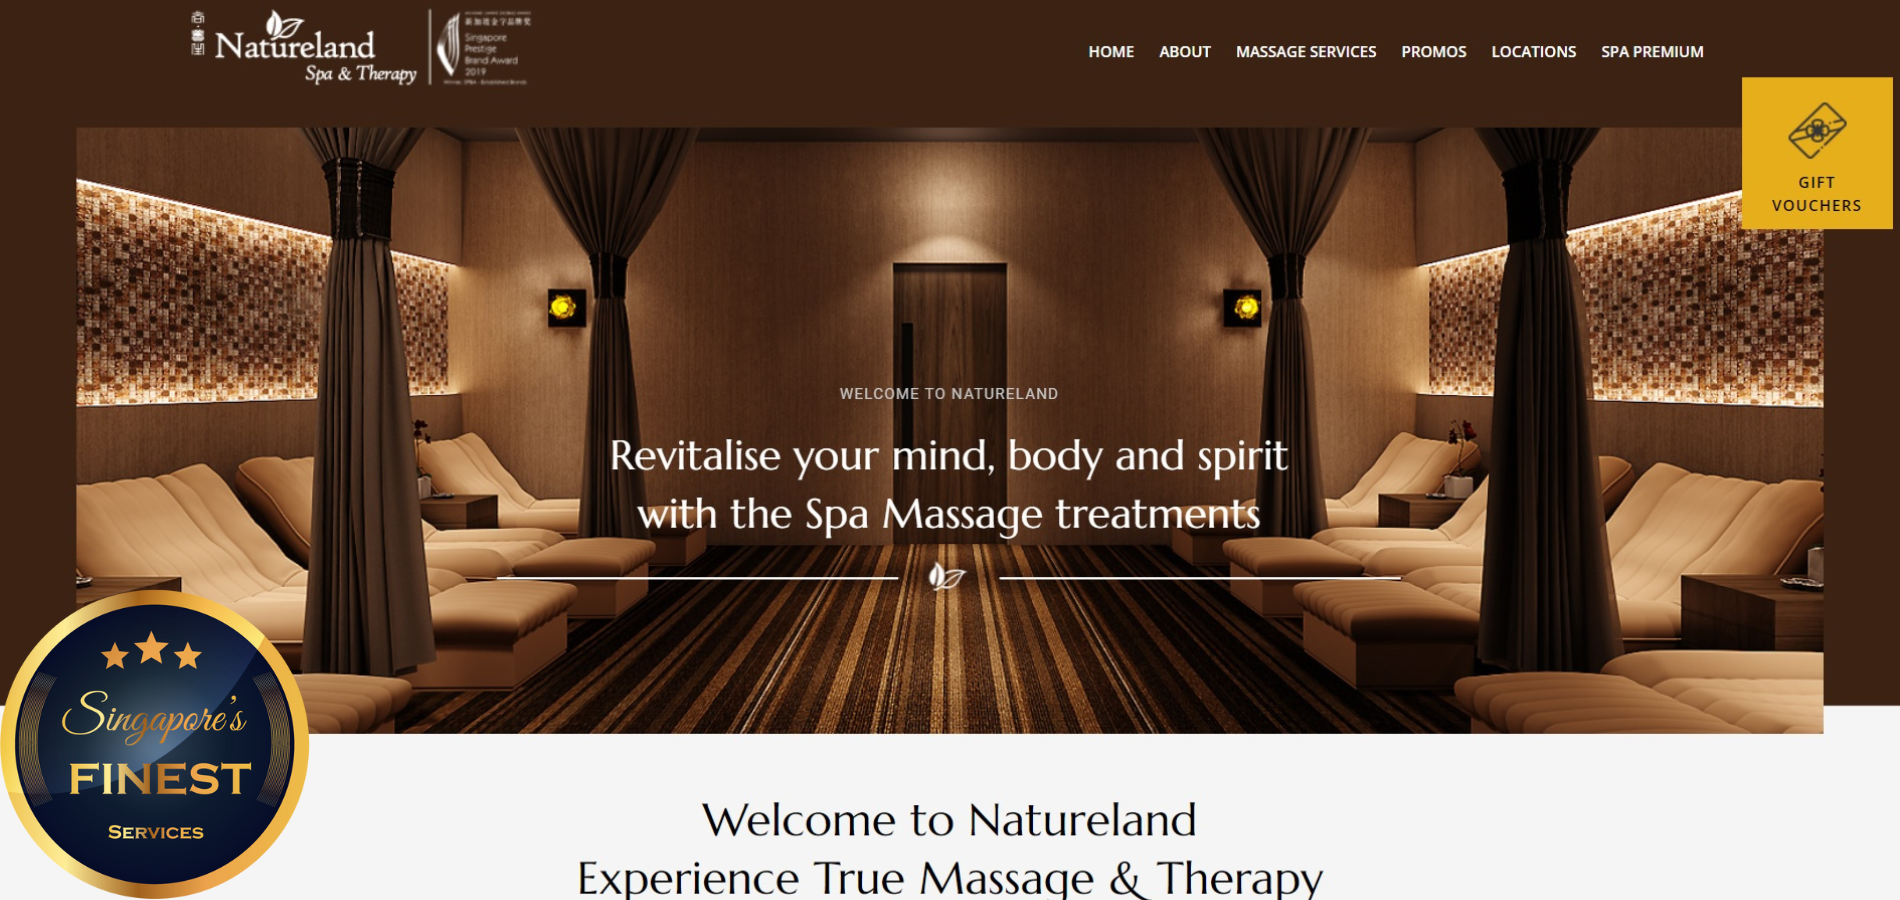 Natureland Spa and Therapy - Spa and Massage Singapore